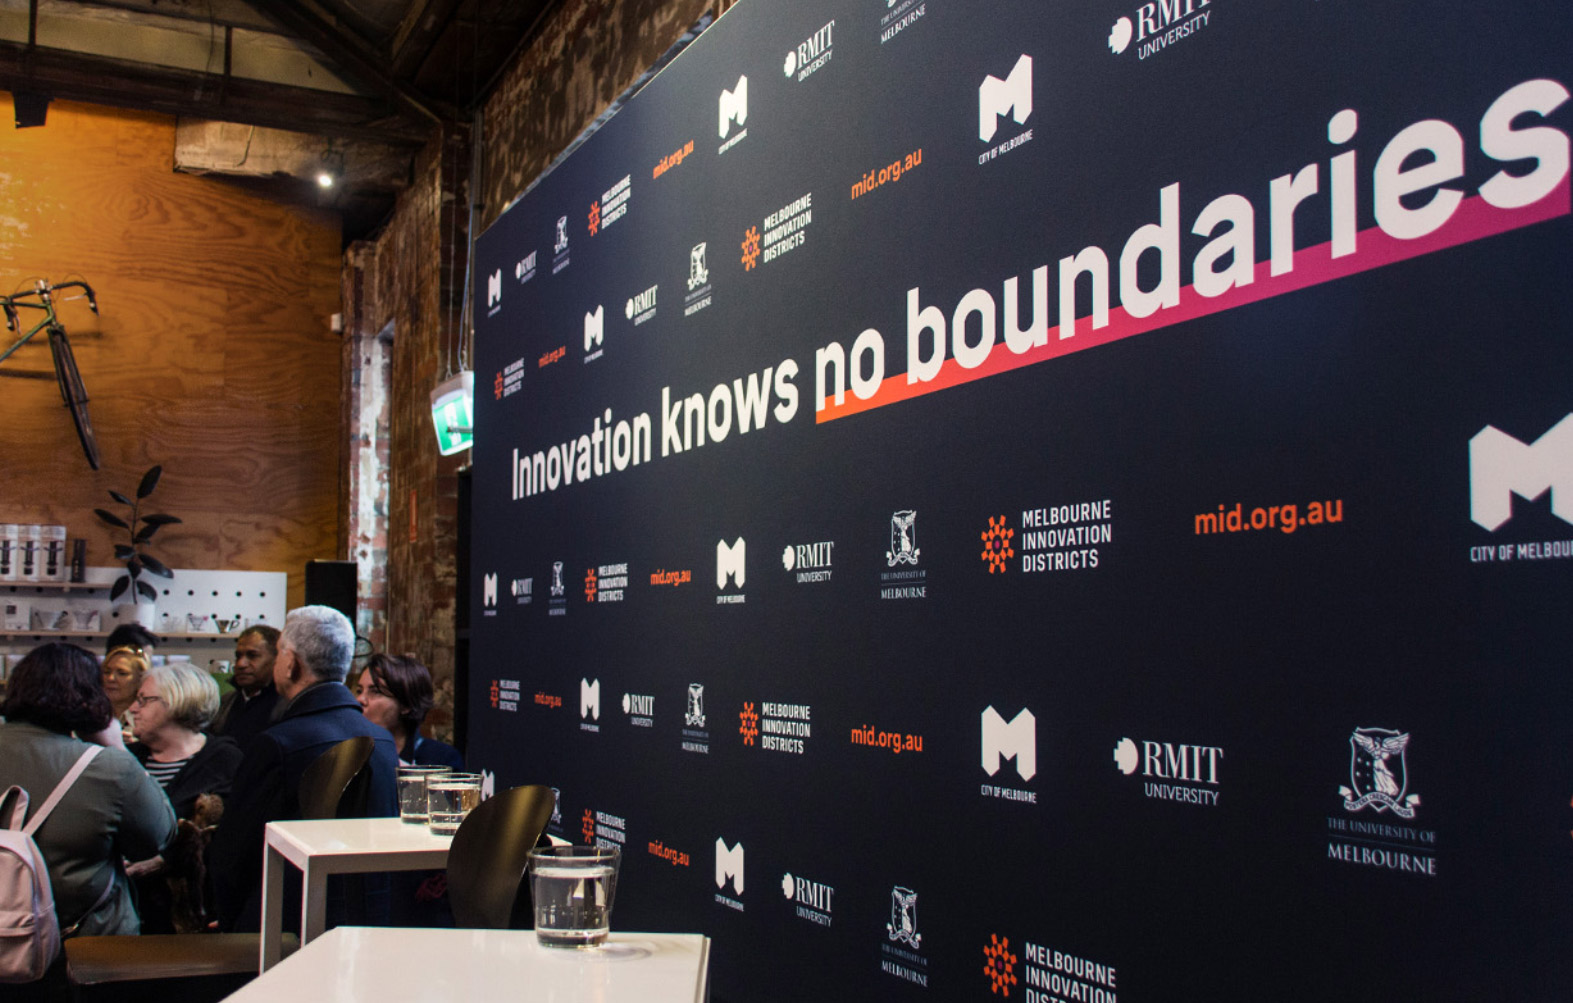 RMIT signage with text saying Innovation knows no boundaries